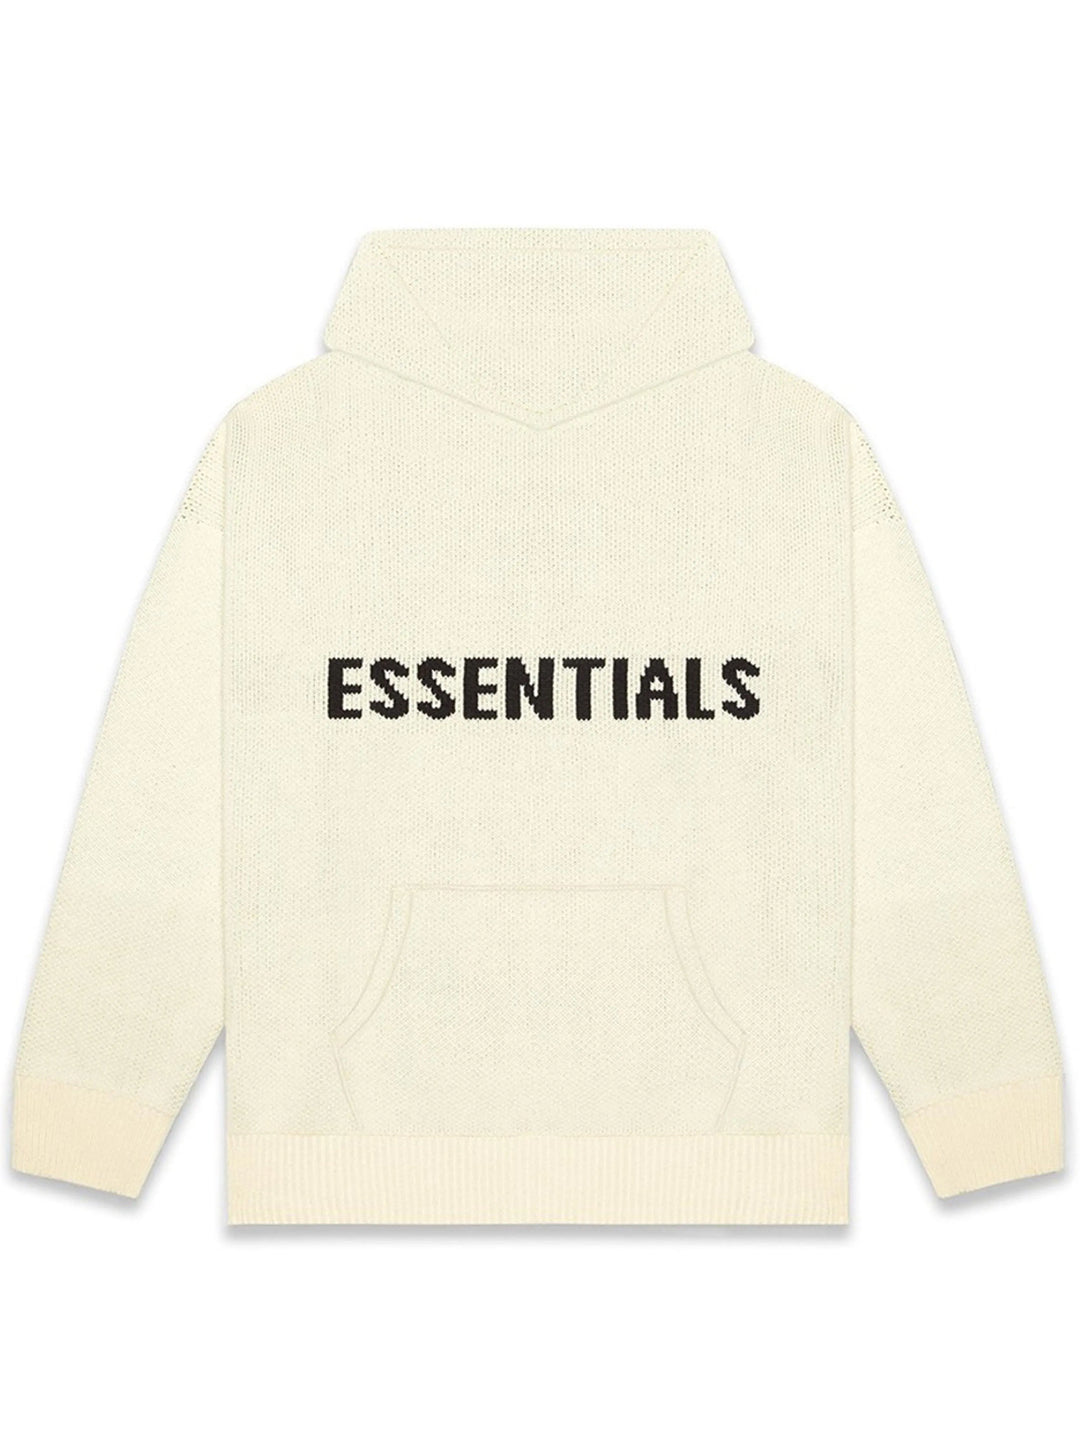 Fear Of God Essentials Knit Pull Over Hoodie Cream [FW20] Prior